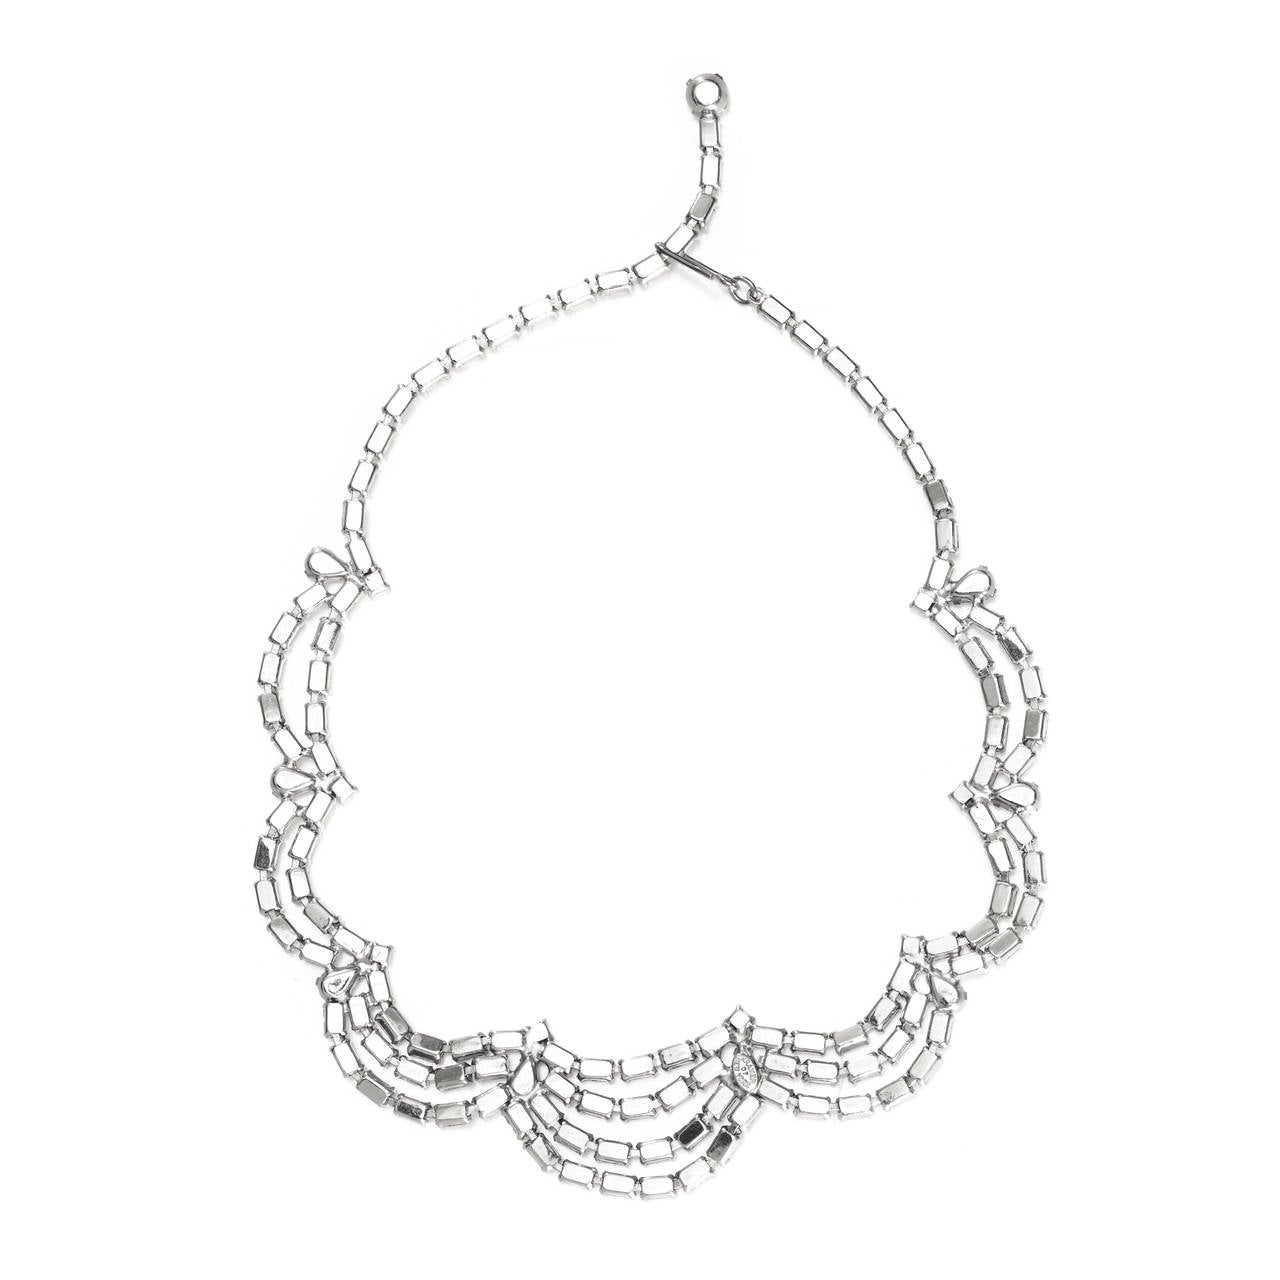 Lovely Rhodium plated graduated swag design necklace made up of clear crystal baguette rhinestones by Kramer of New York.

The necklace is 39cm or 15 inches long, and can be adjusted to be made smaller, the longest drop from the necklace is